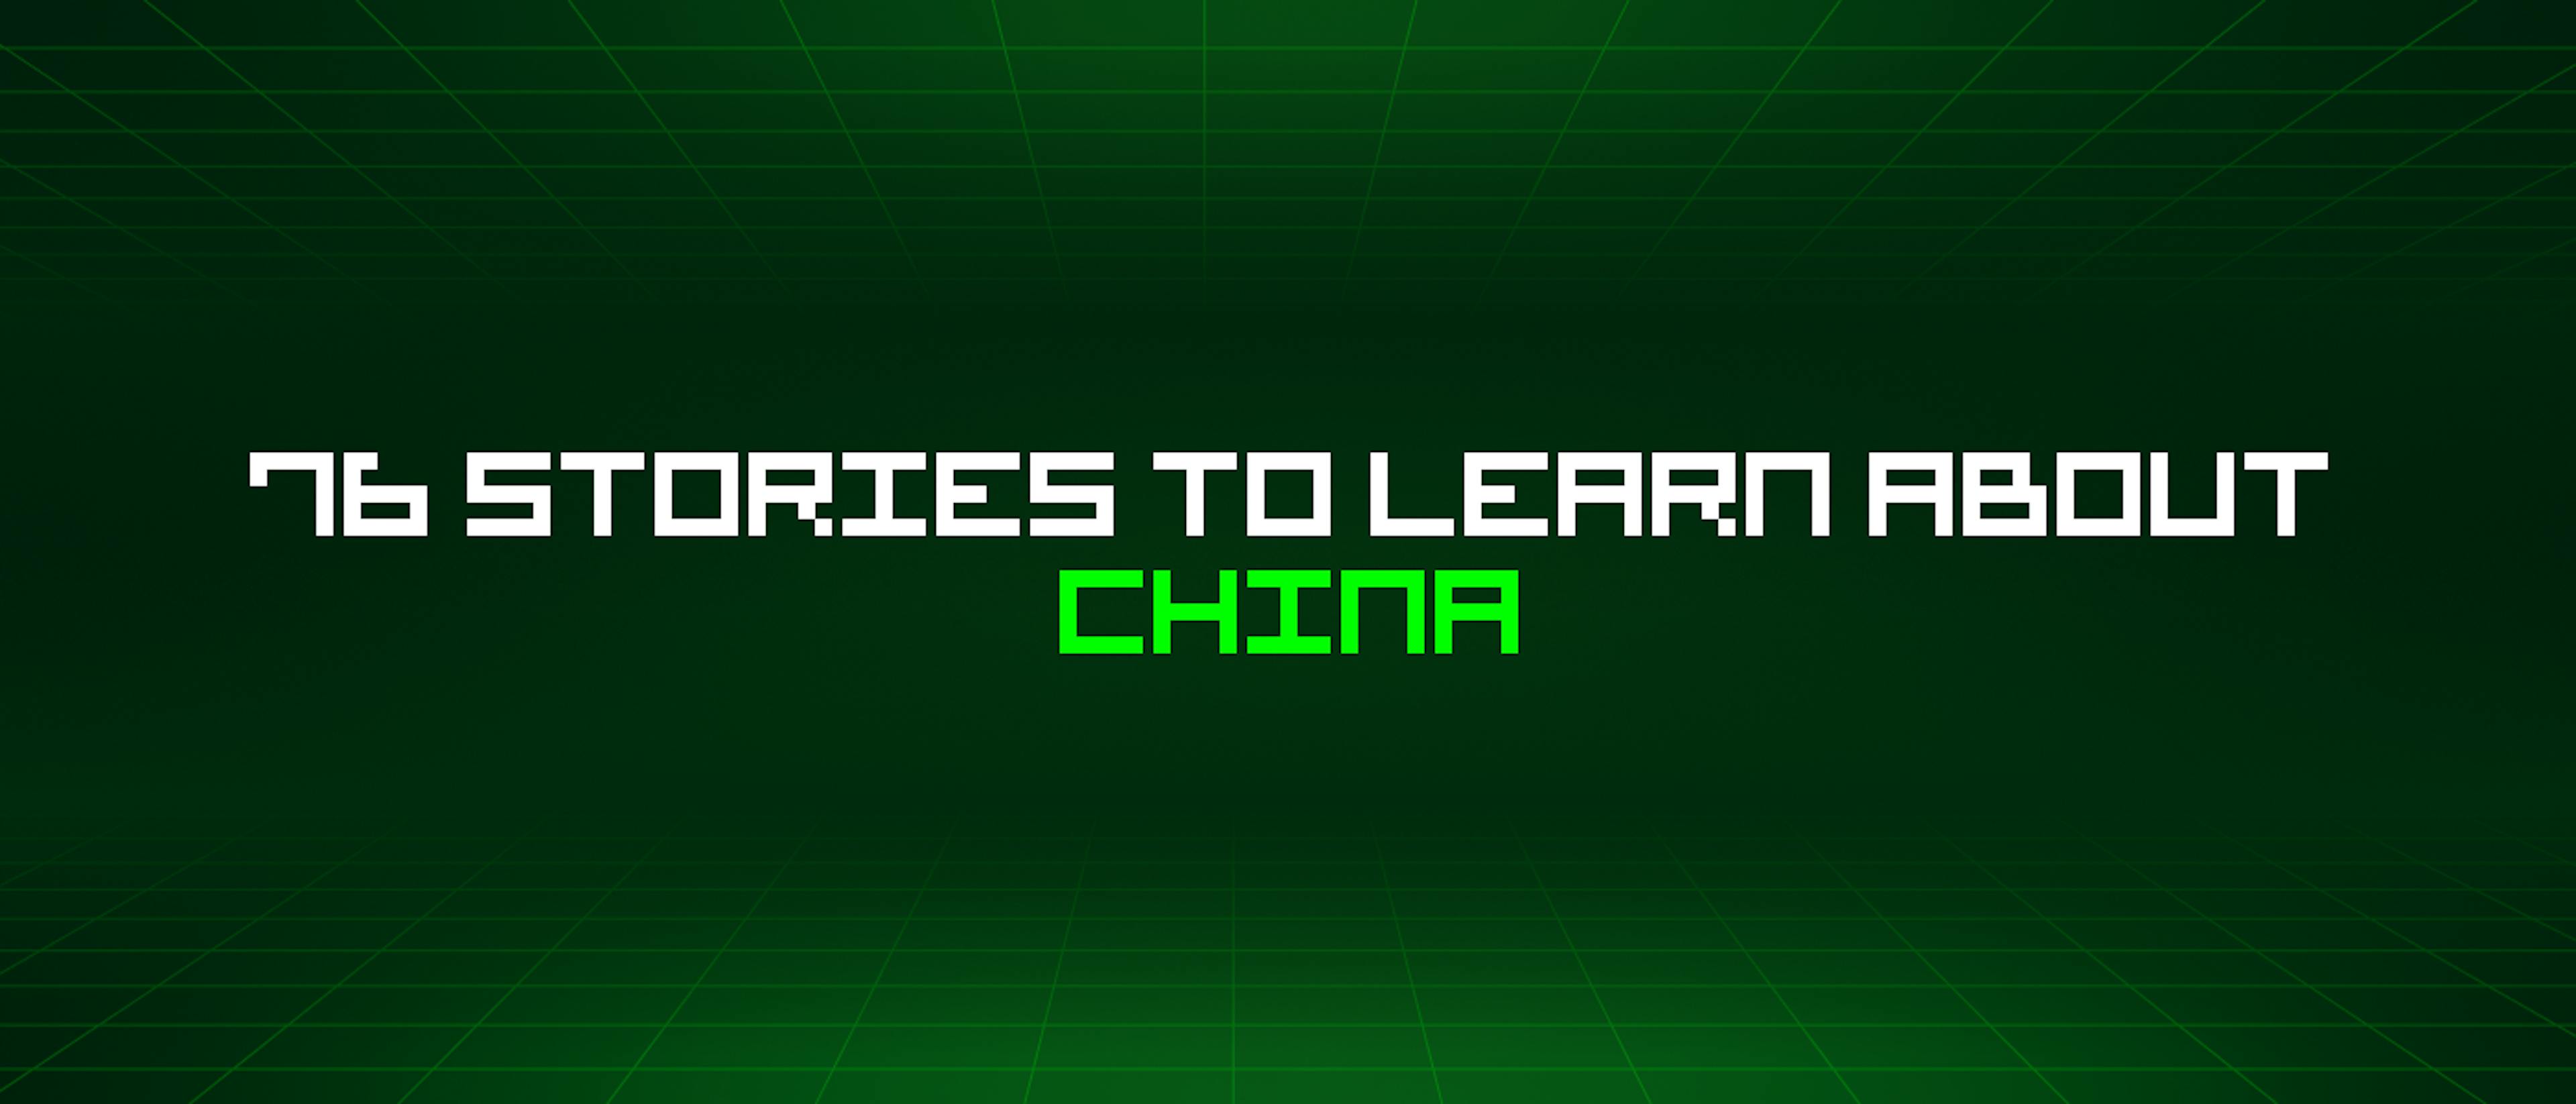 featured image - 76 Stories To Learn About China